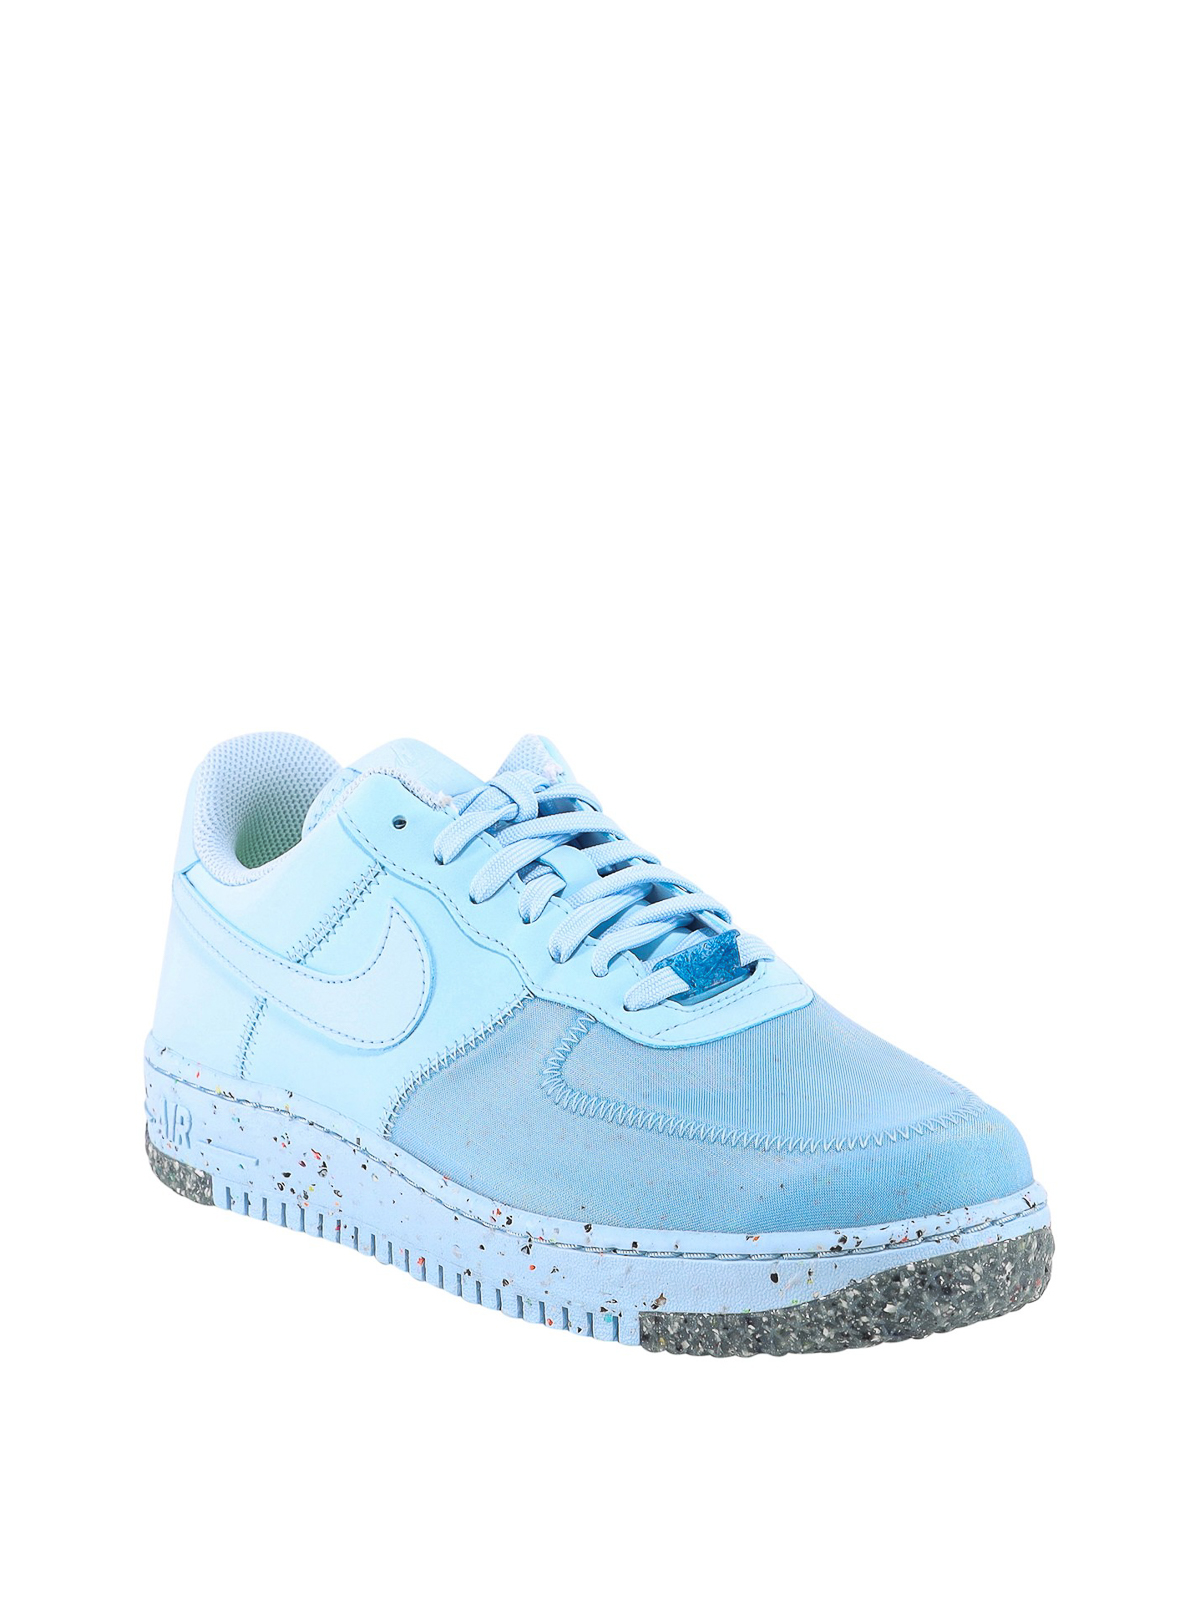 Air Force 1 leather trainers